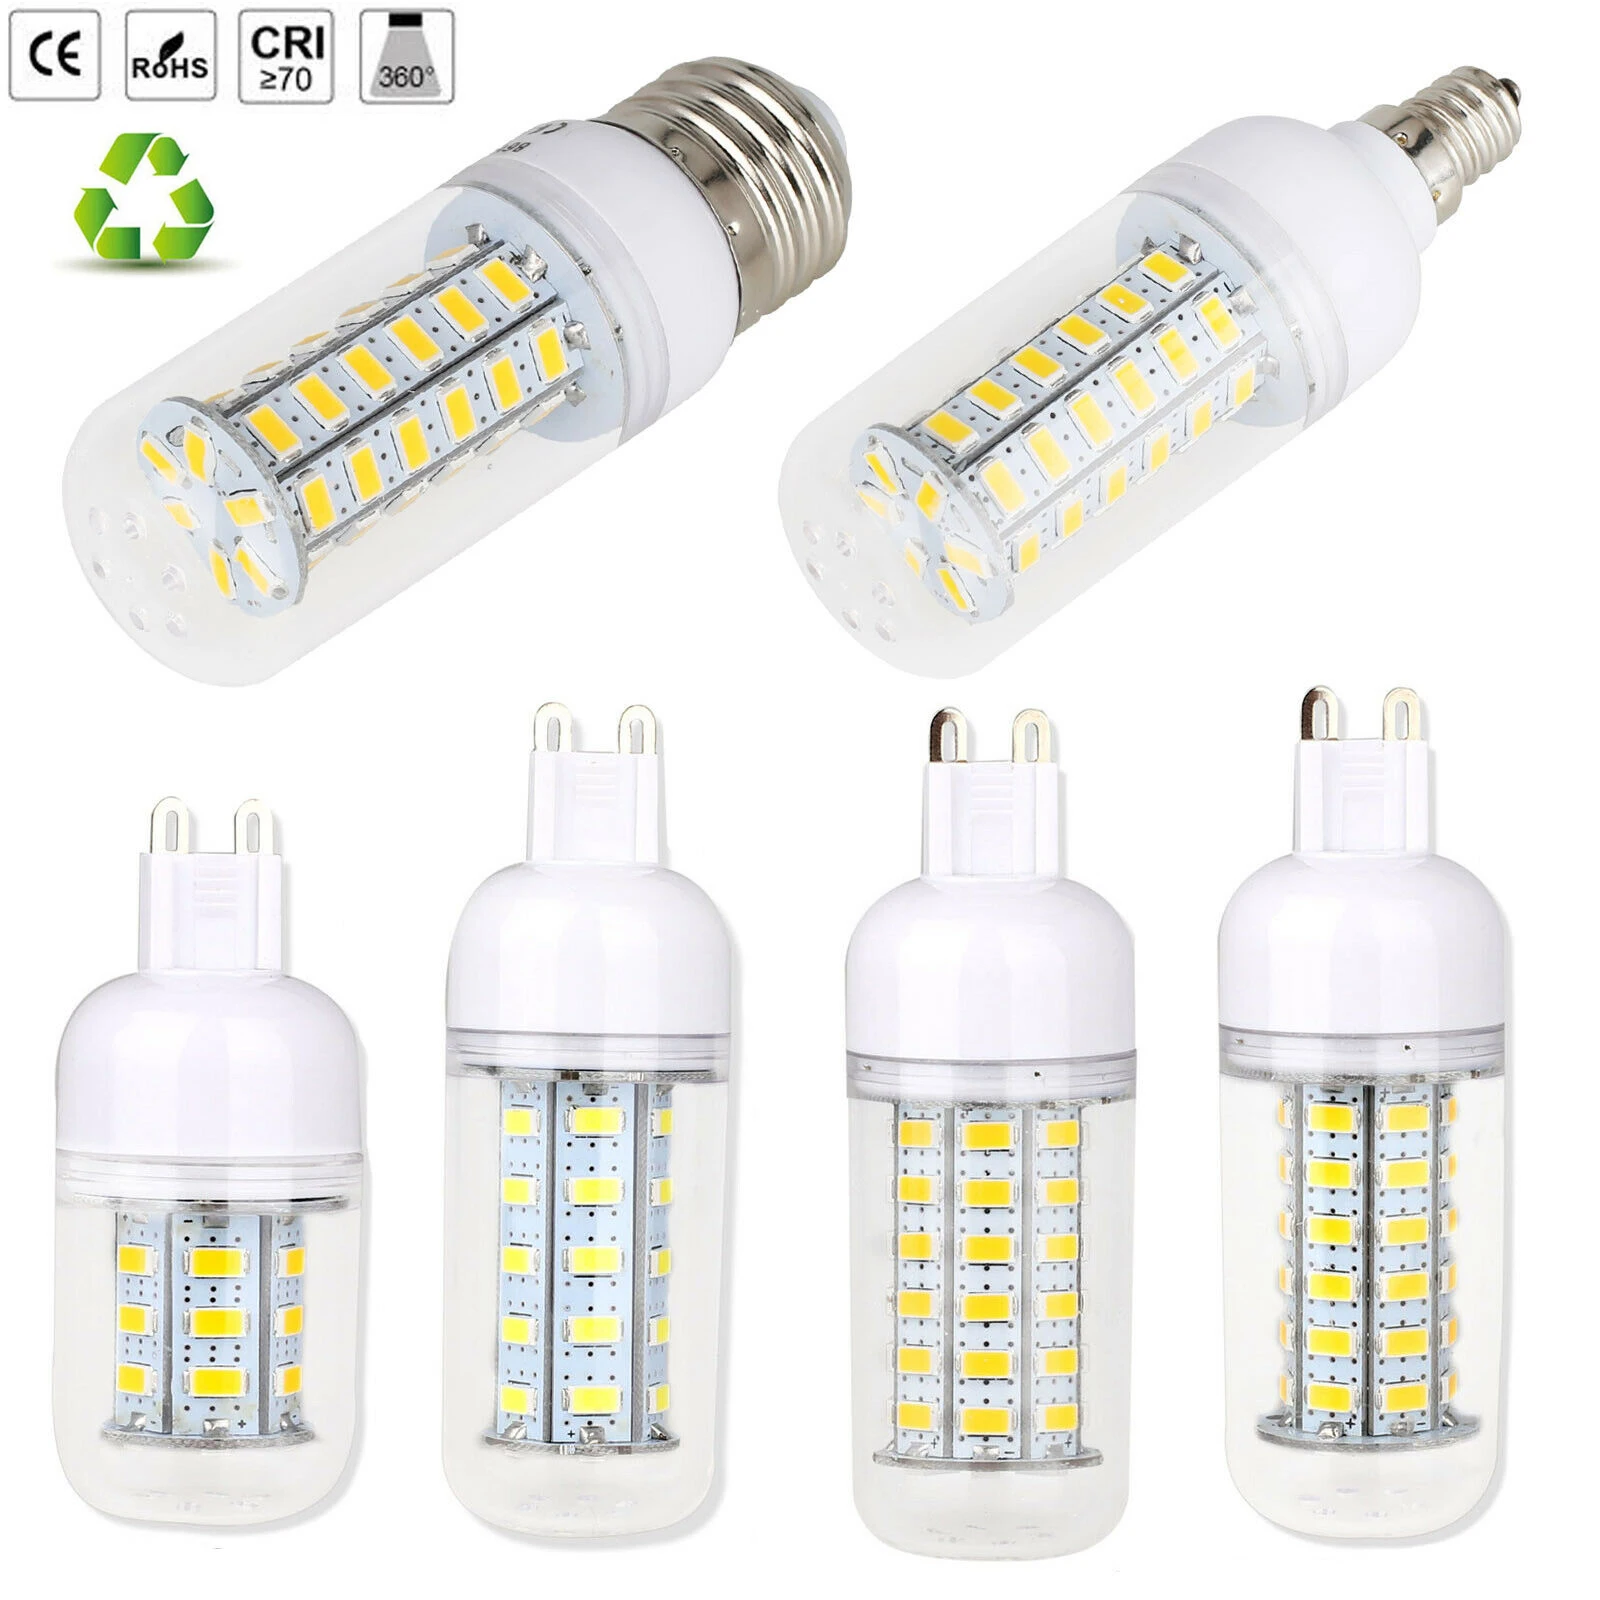 

3W-15W LED Corn Light Bulbs E14 E27 B22 G9 GU10 AC 110V 220V 5730 SMD Ampoule Bombilla Candle Lamp for Home Bedroom Super Bright